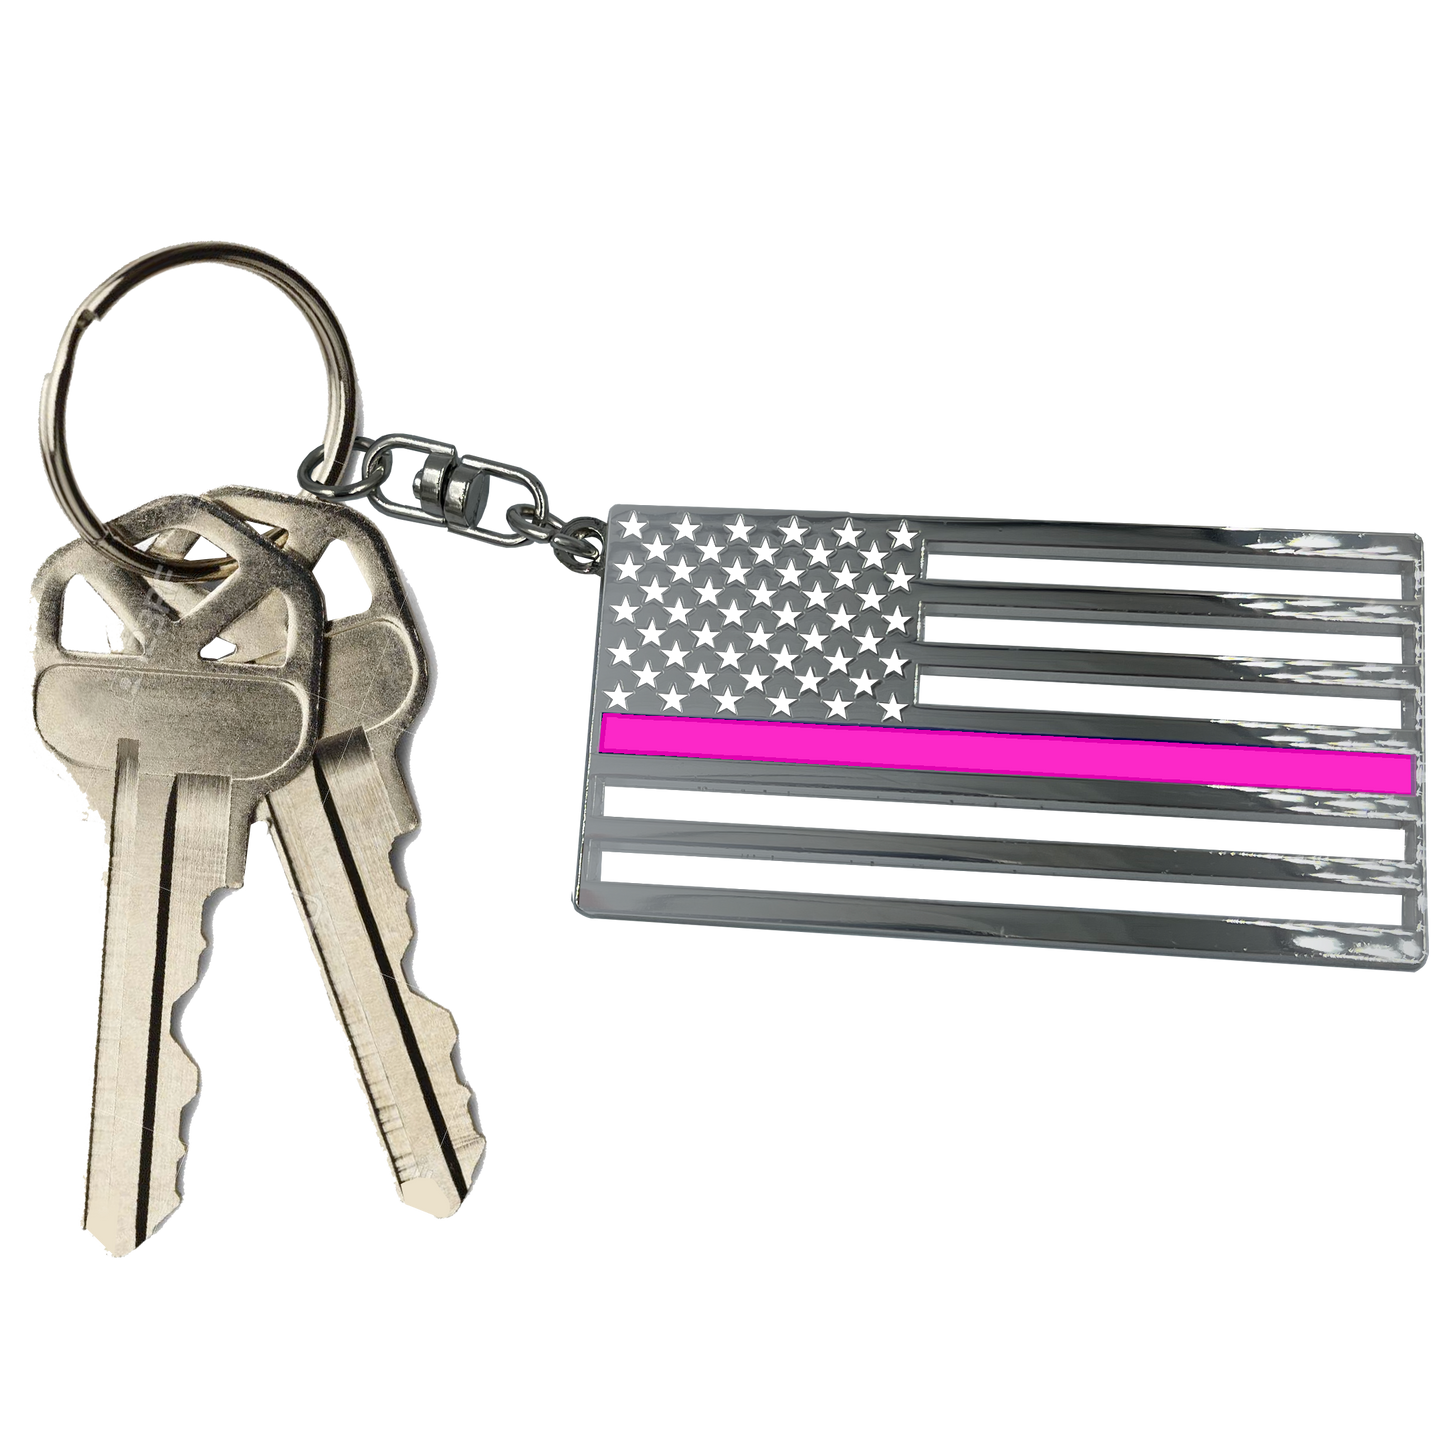 BL8-018 Thin Pink Line Breast Cancer Awareness American Flag die-cut chrome challenge coin keychain with swivel and 1" keyring